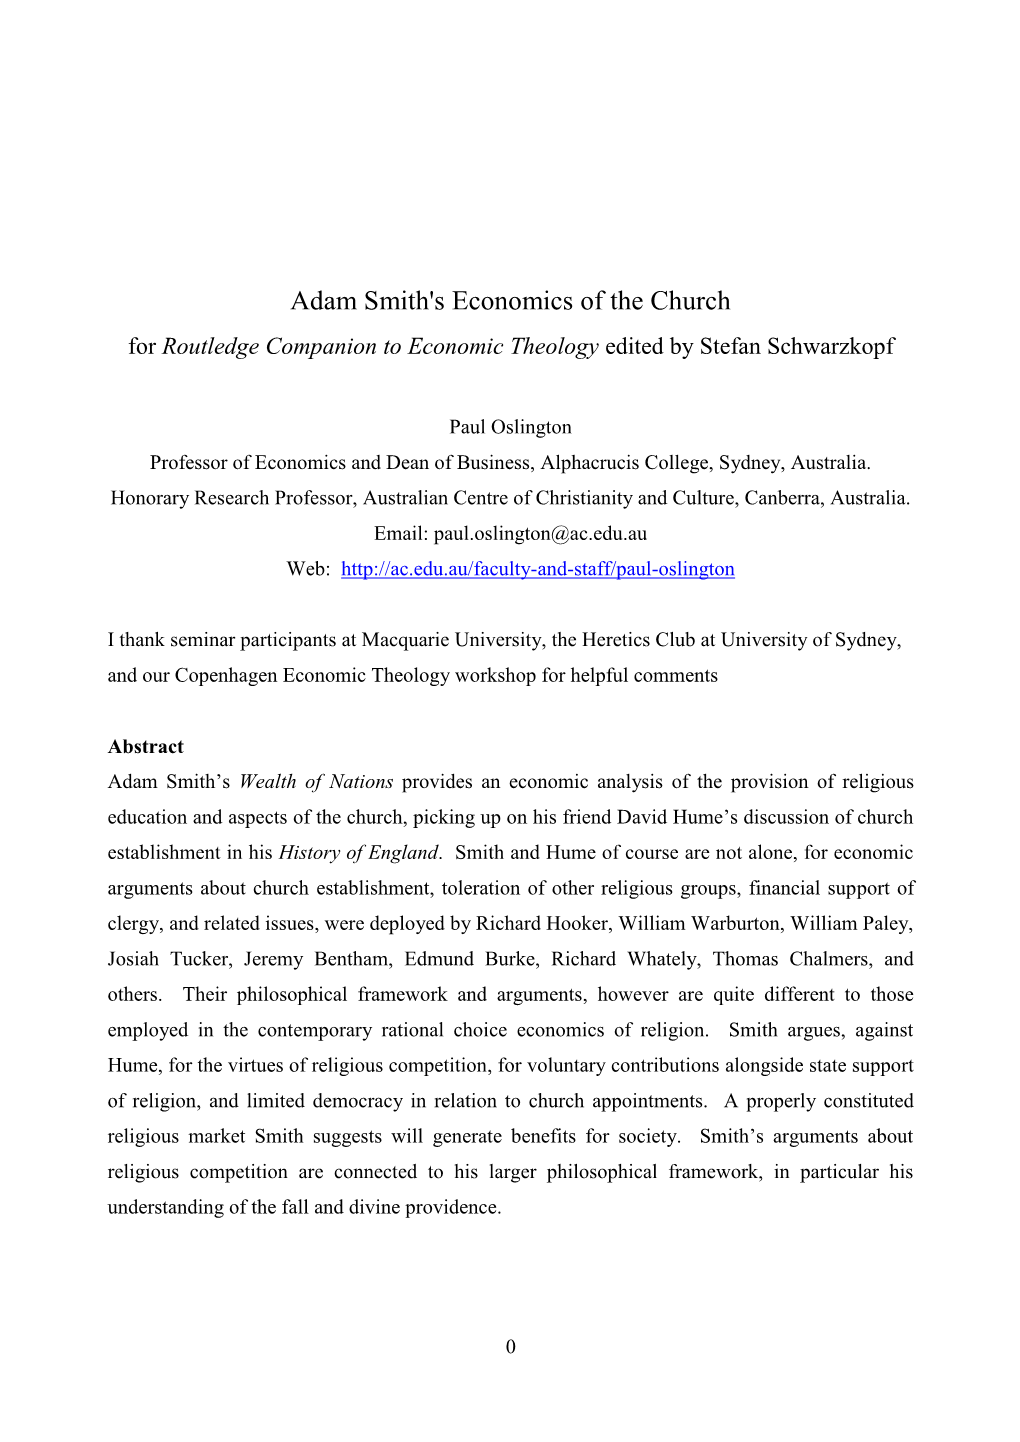 Adam Smith's Economics of the Church for Routledge Companion to Economic Theology Edited by Stefan Schwarzkopf